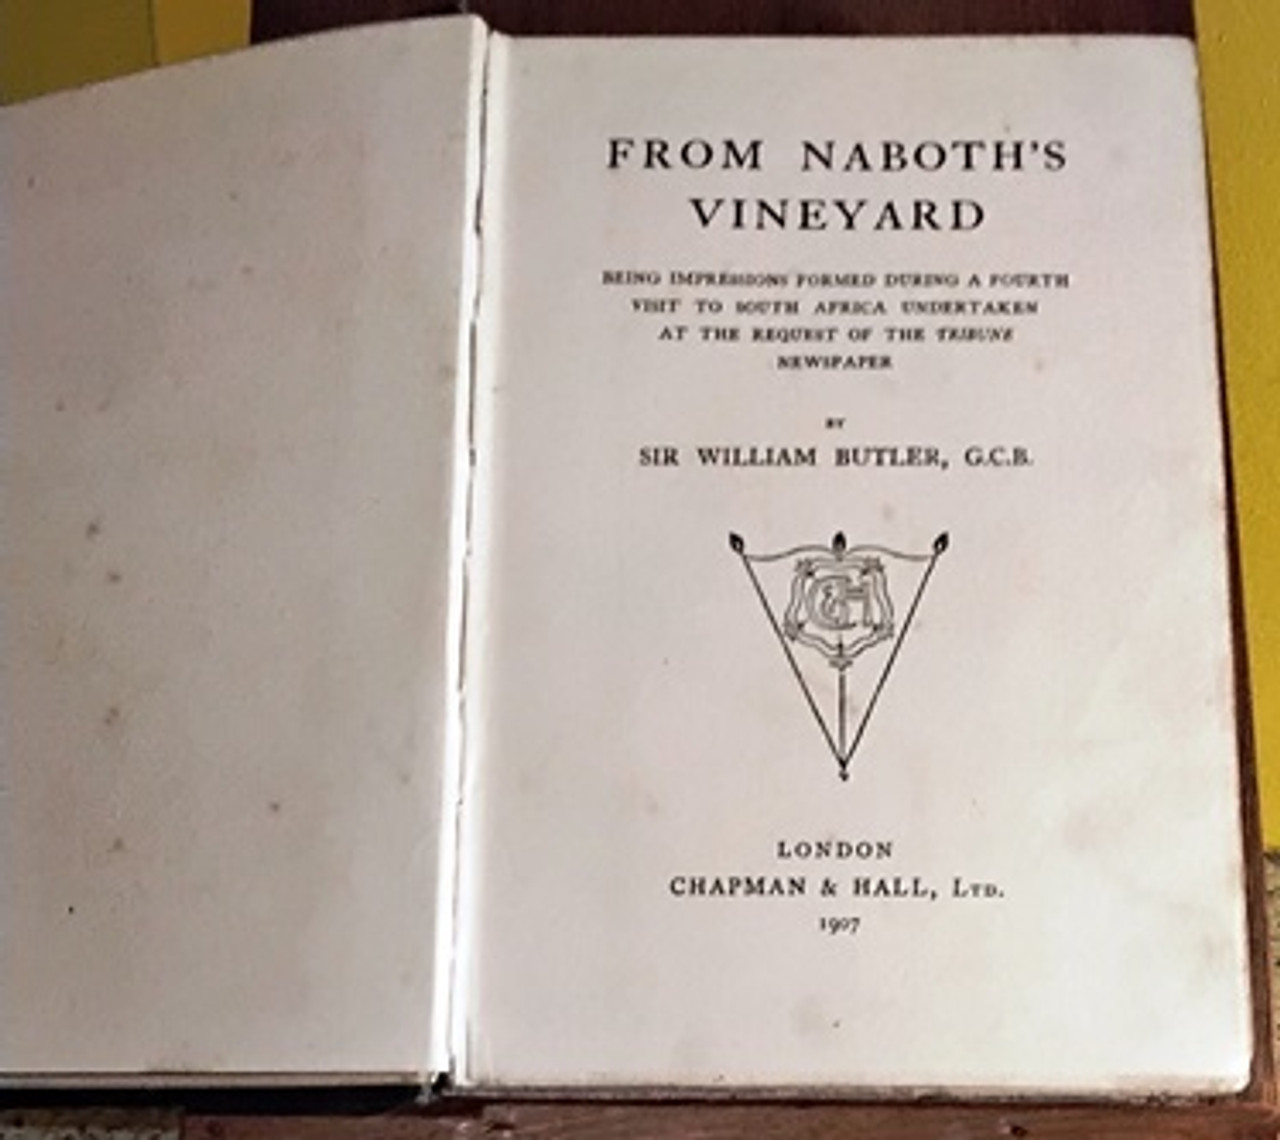 1907 From Naboth's Vineyard by Sir William Butler